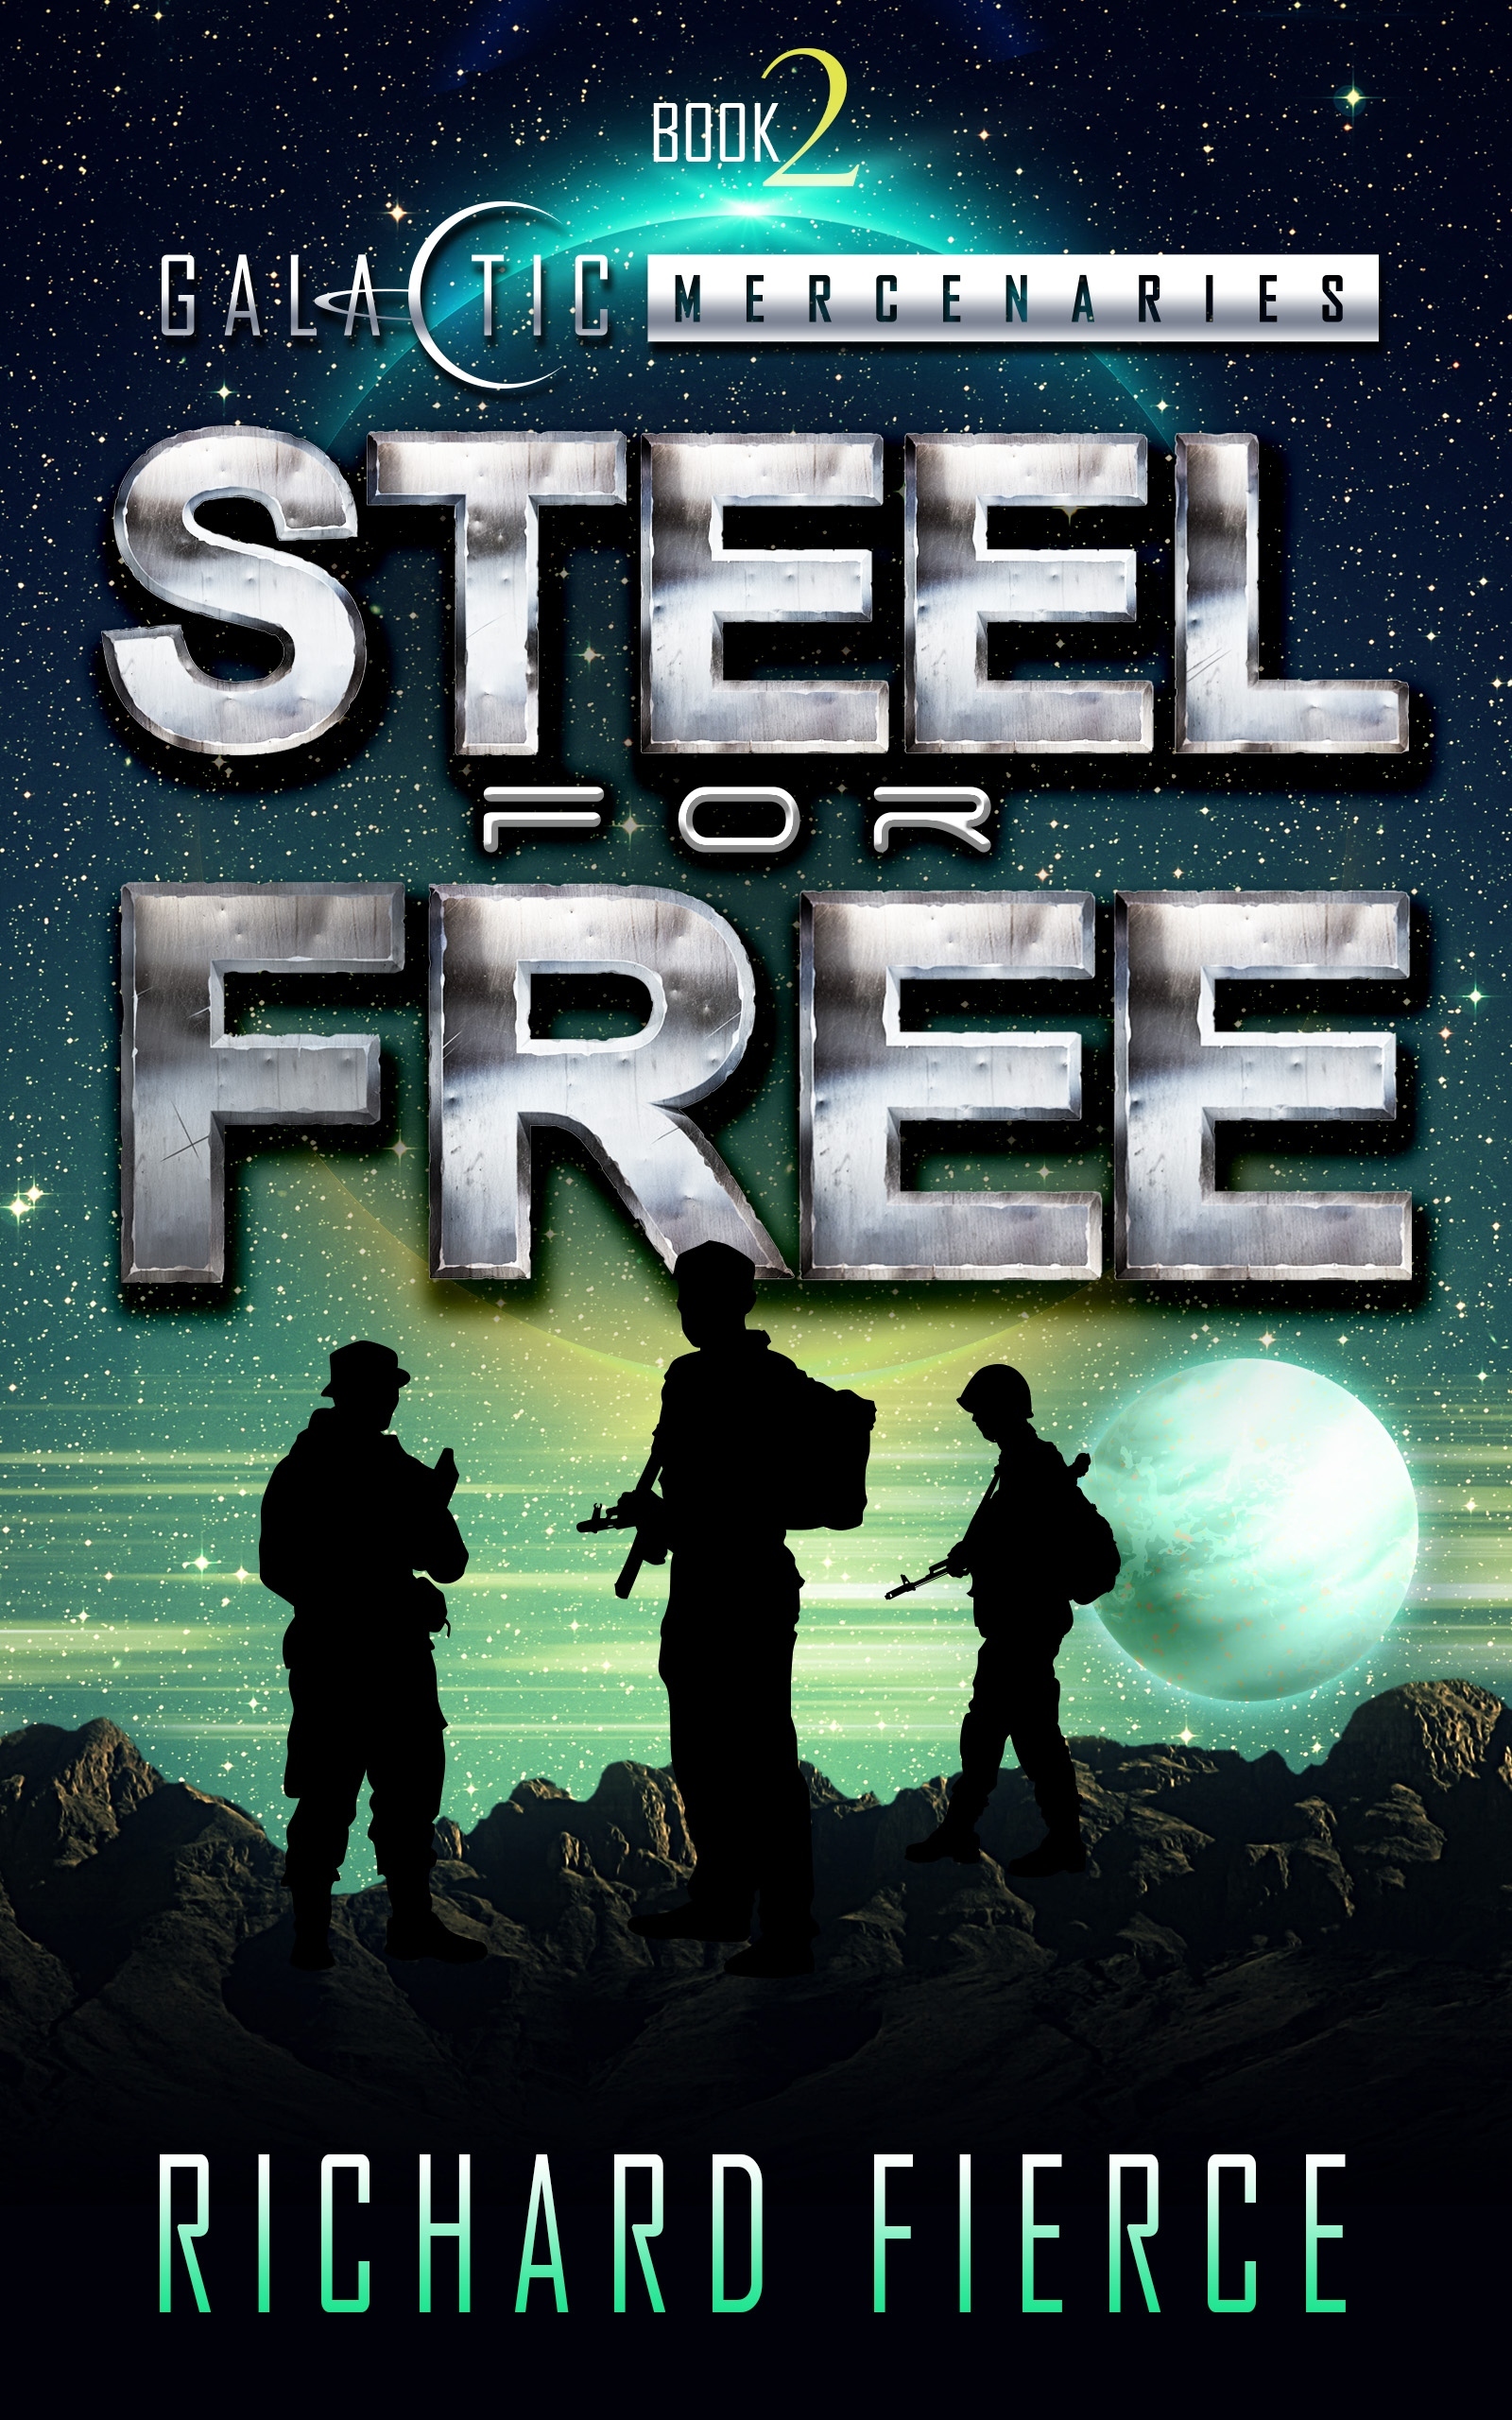 Steel for Free